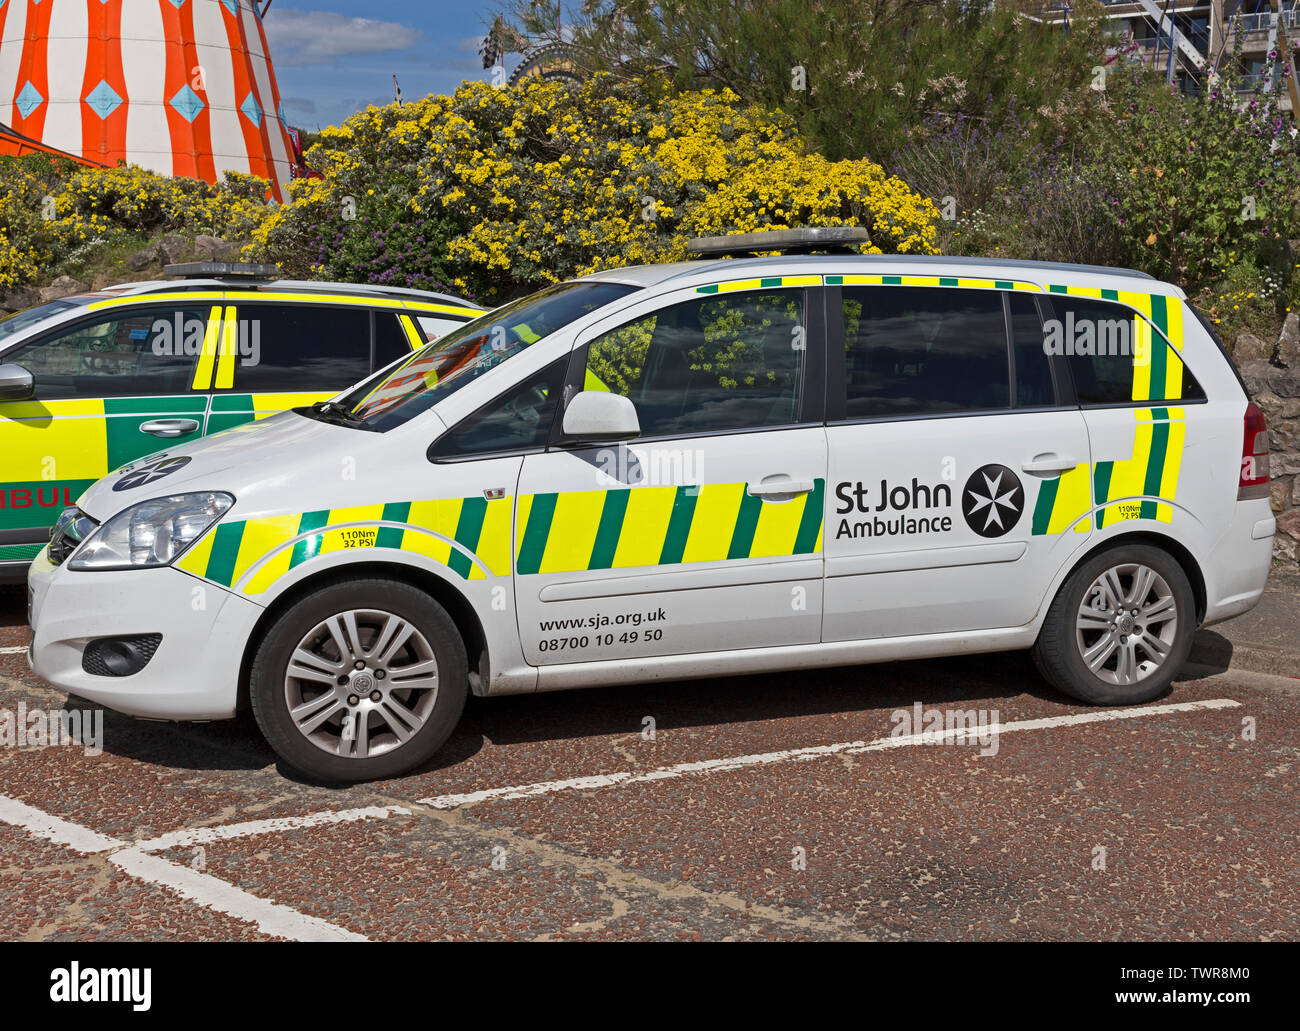 A St John Ambulance at the annual Weston Air Festival in Weston-super-Mare, UK. Stock Photo